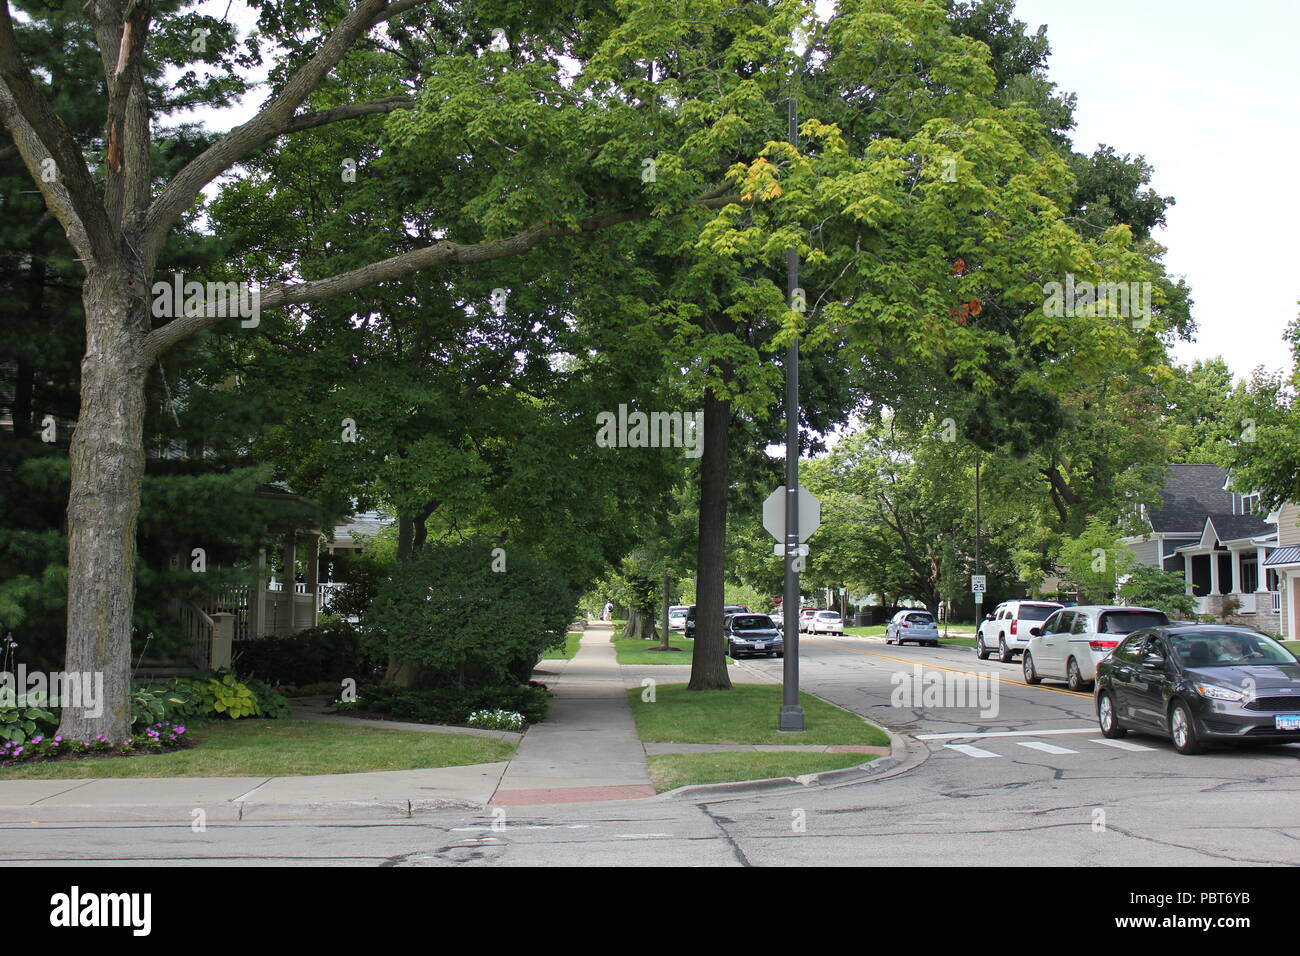 A typical streetscape with a street and quiet sidewalk in a small local town. Stock Photo